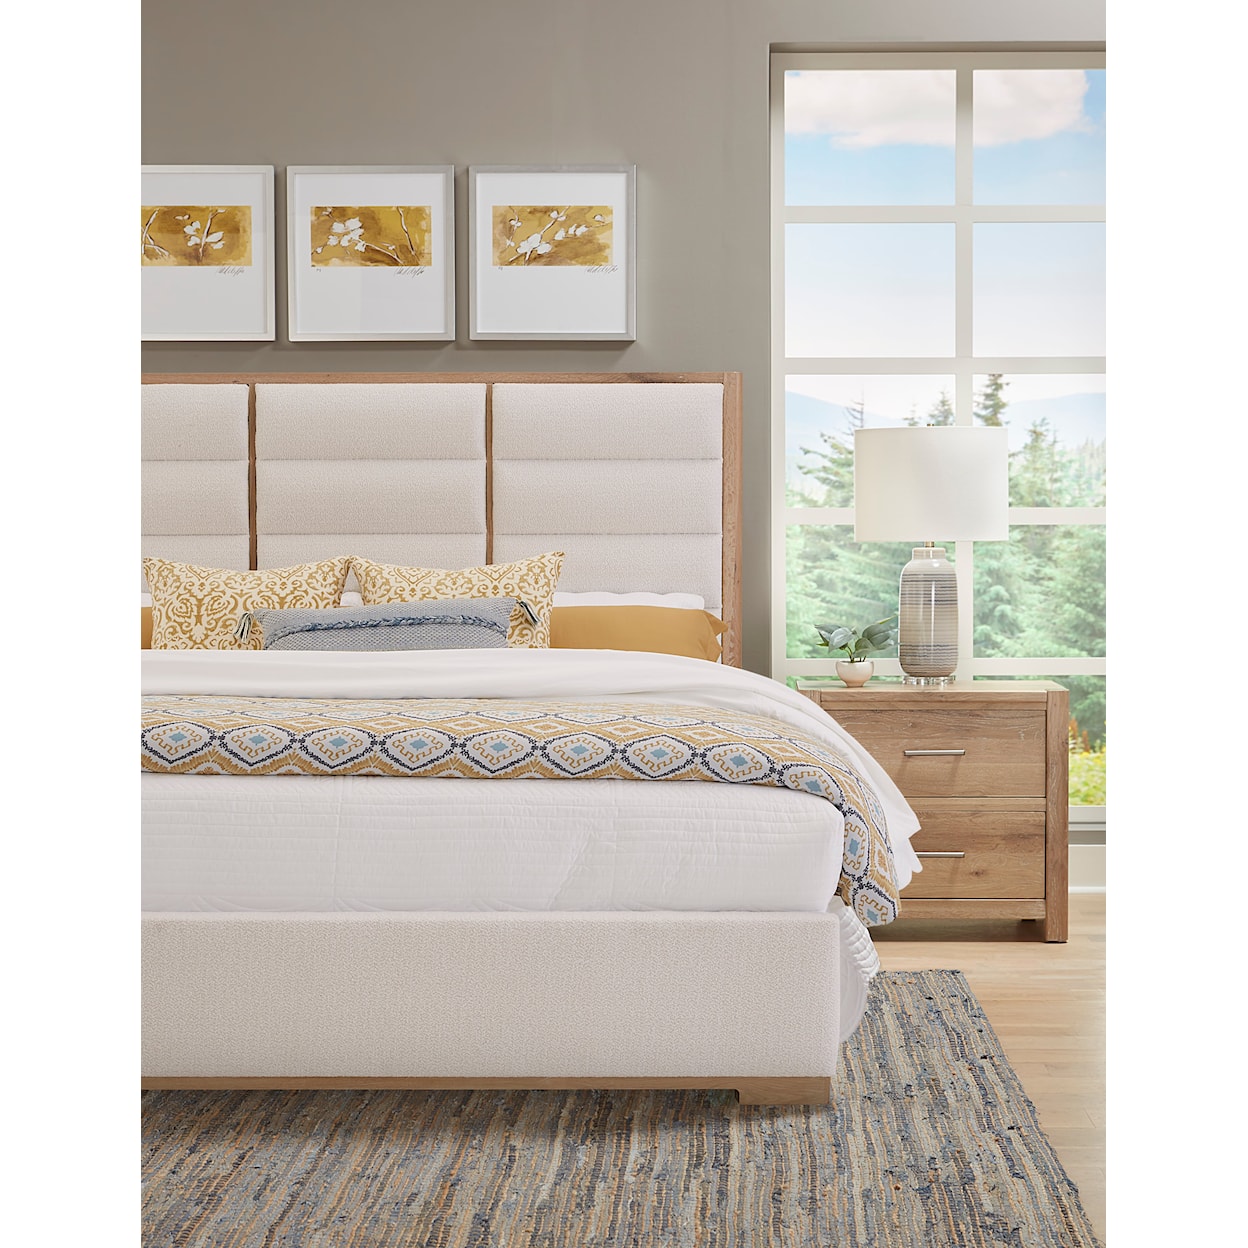 Vaughan Bassett Crafted Oak - Bleached White Upholstered Queen Panel Bed